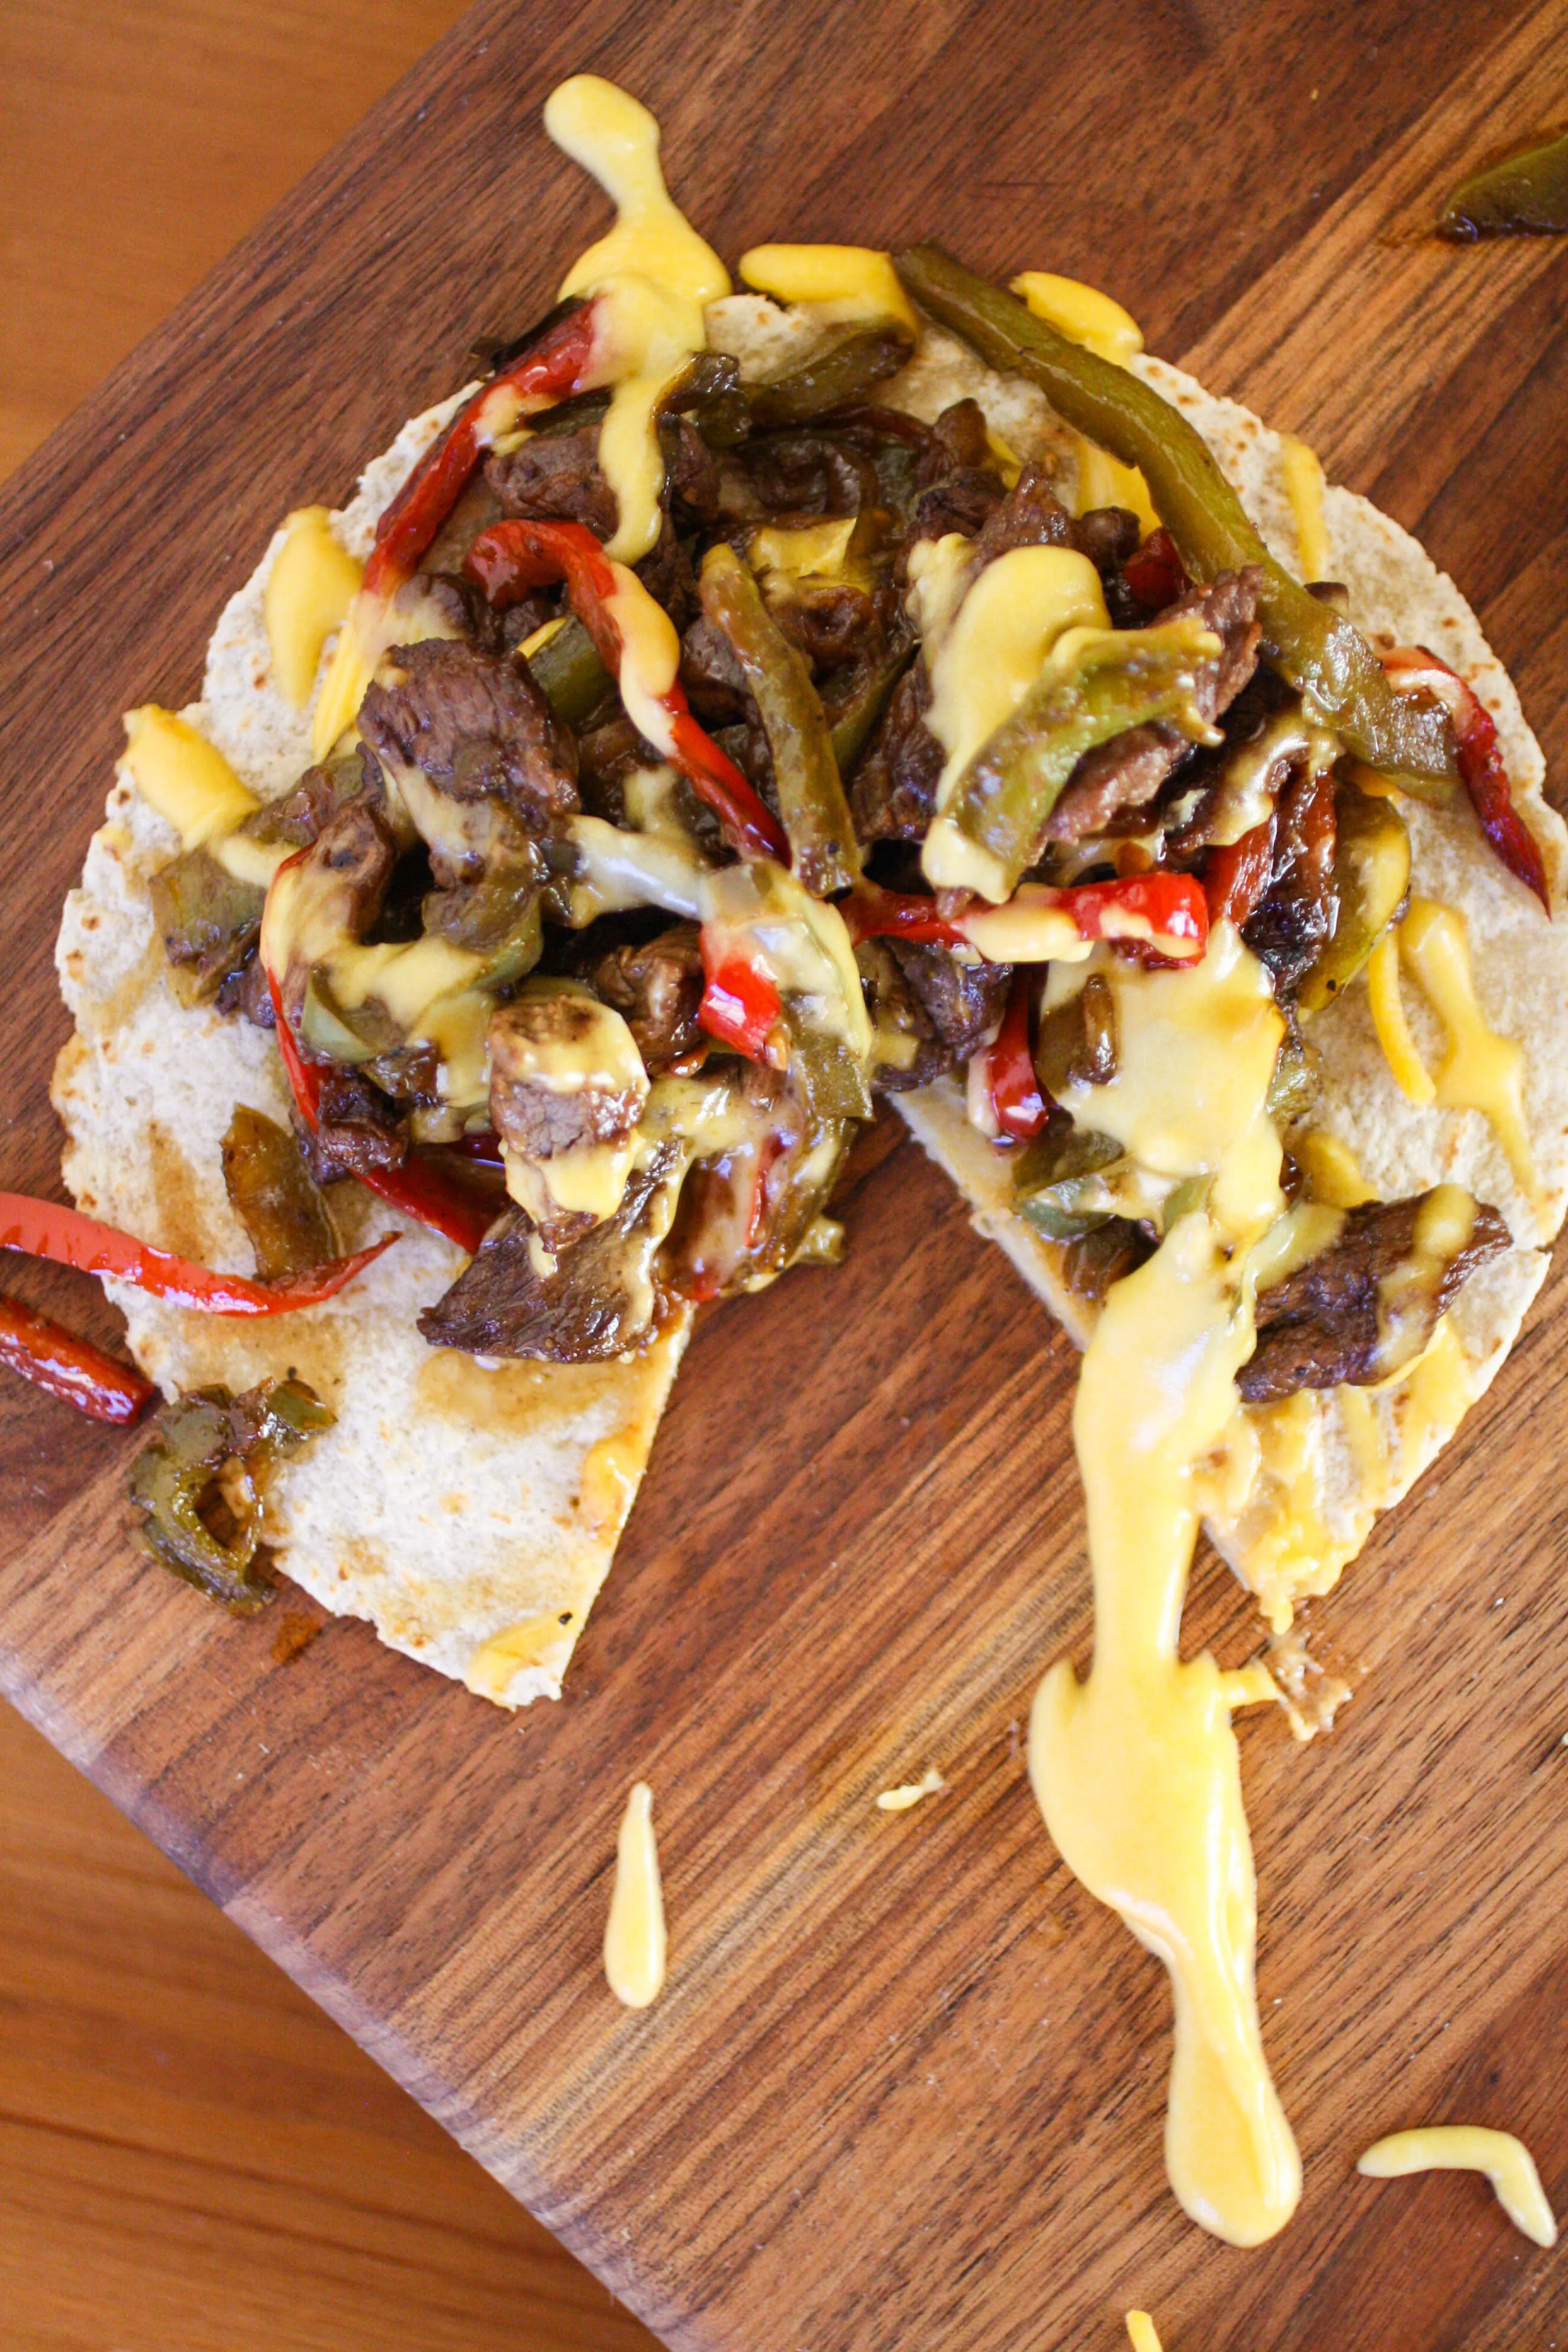 Philly Cheesesteak Tostadas are a delicious meal! You'll love these flavorful and filling Philly Cheesesteak Tostadas.